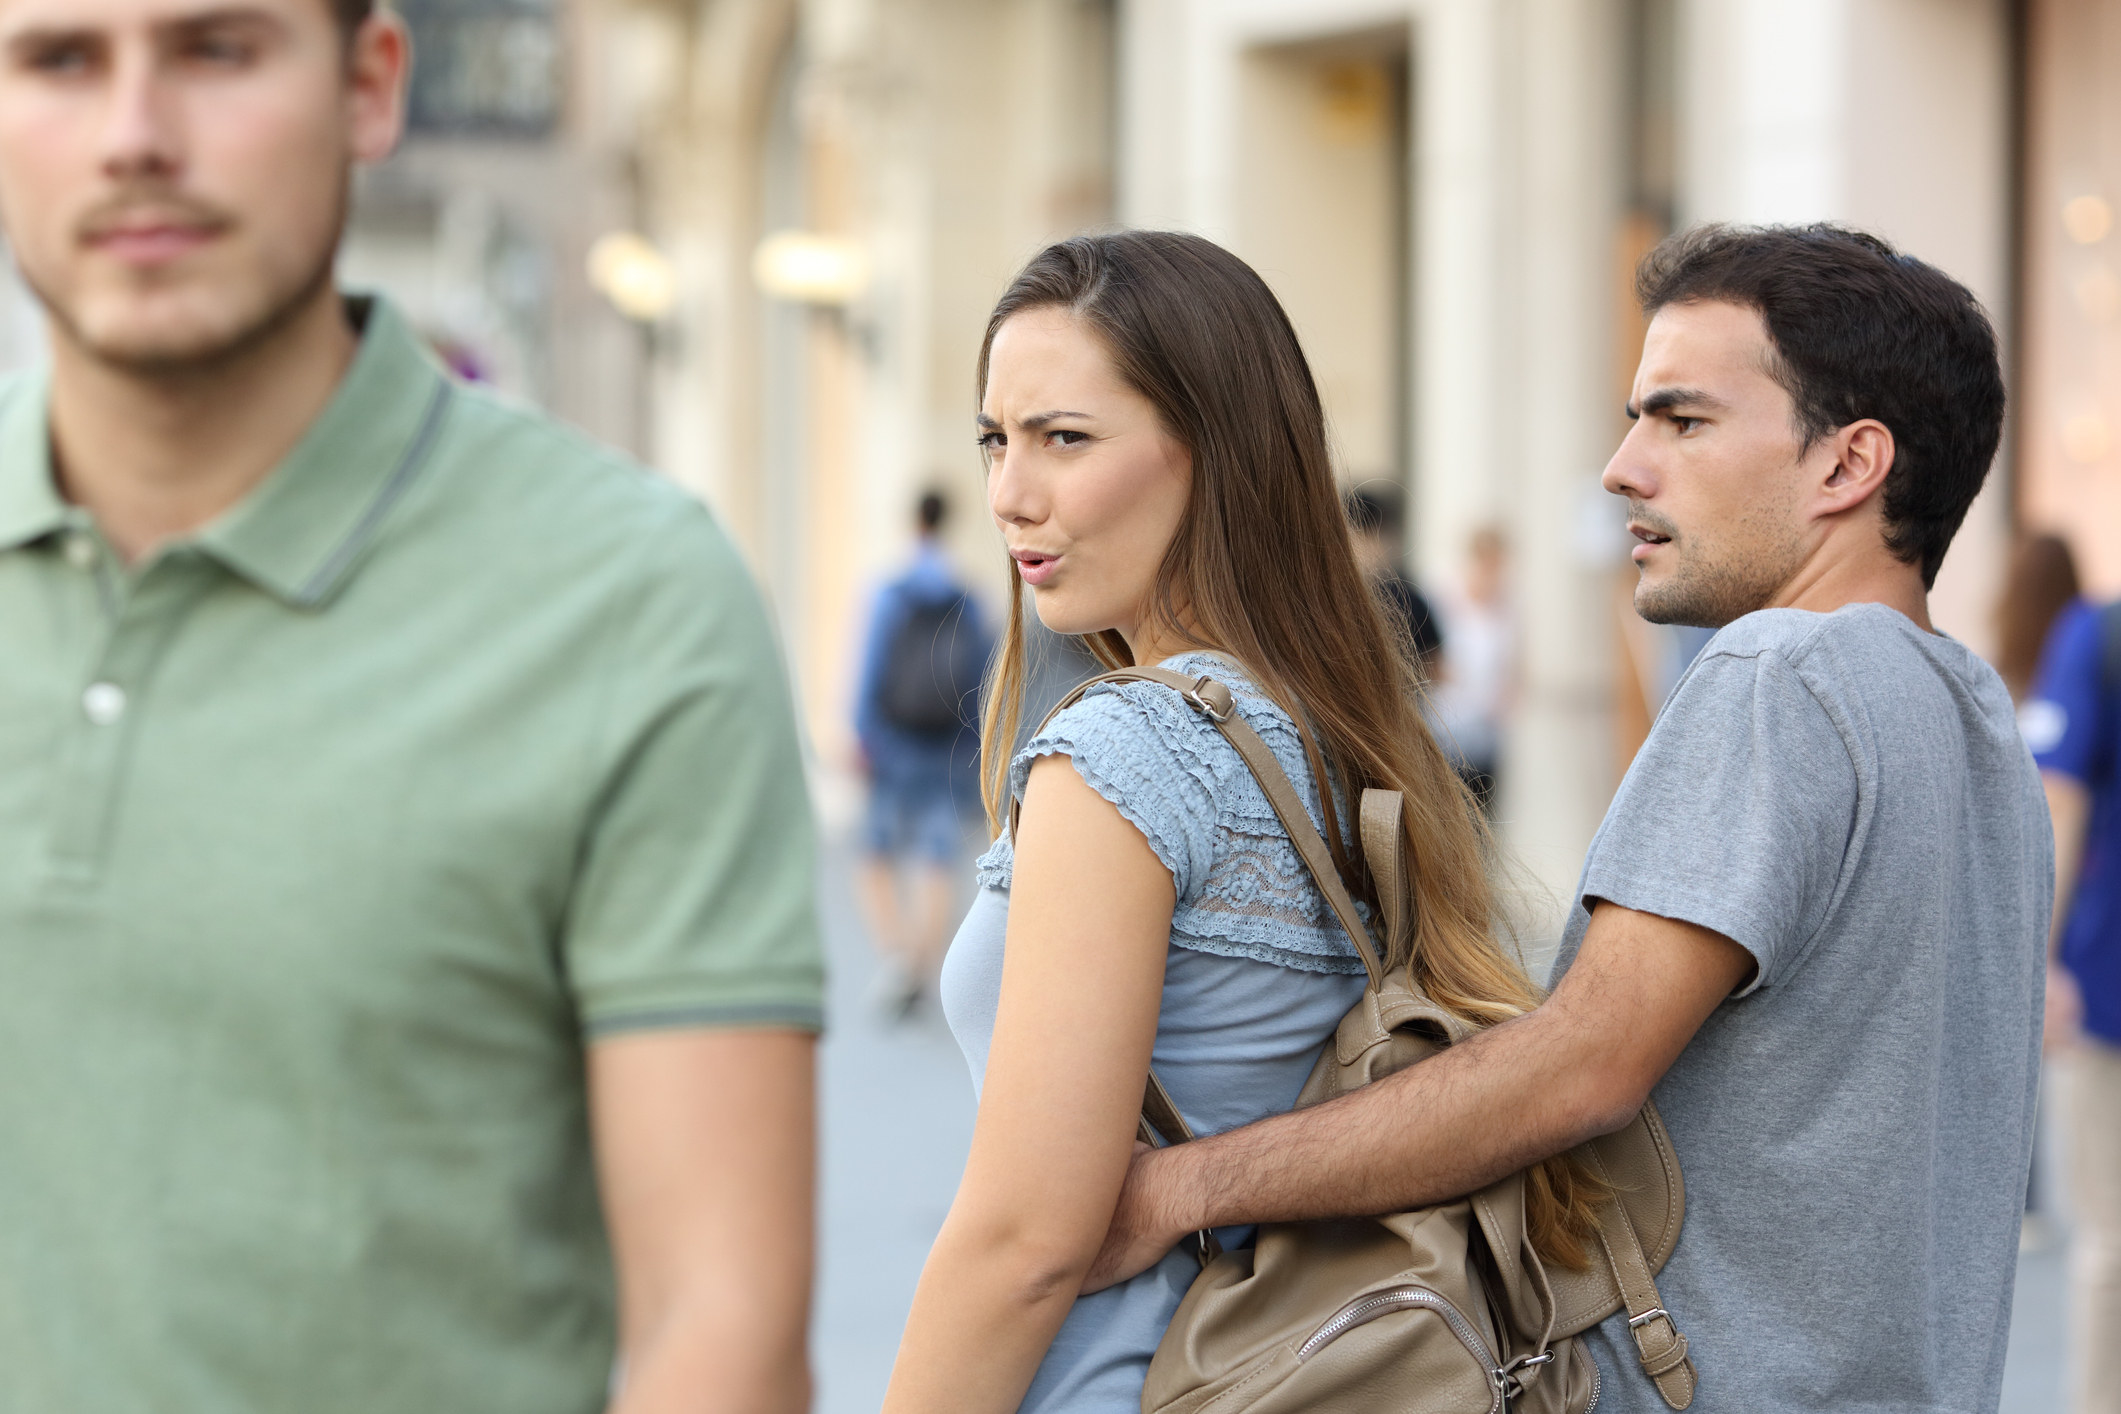 Woman with a man while looking at another man